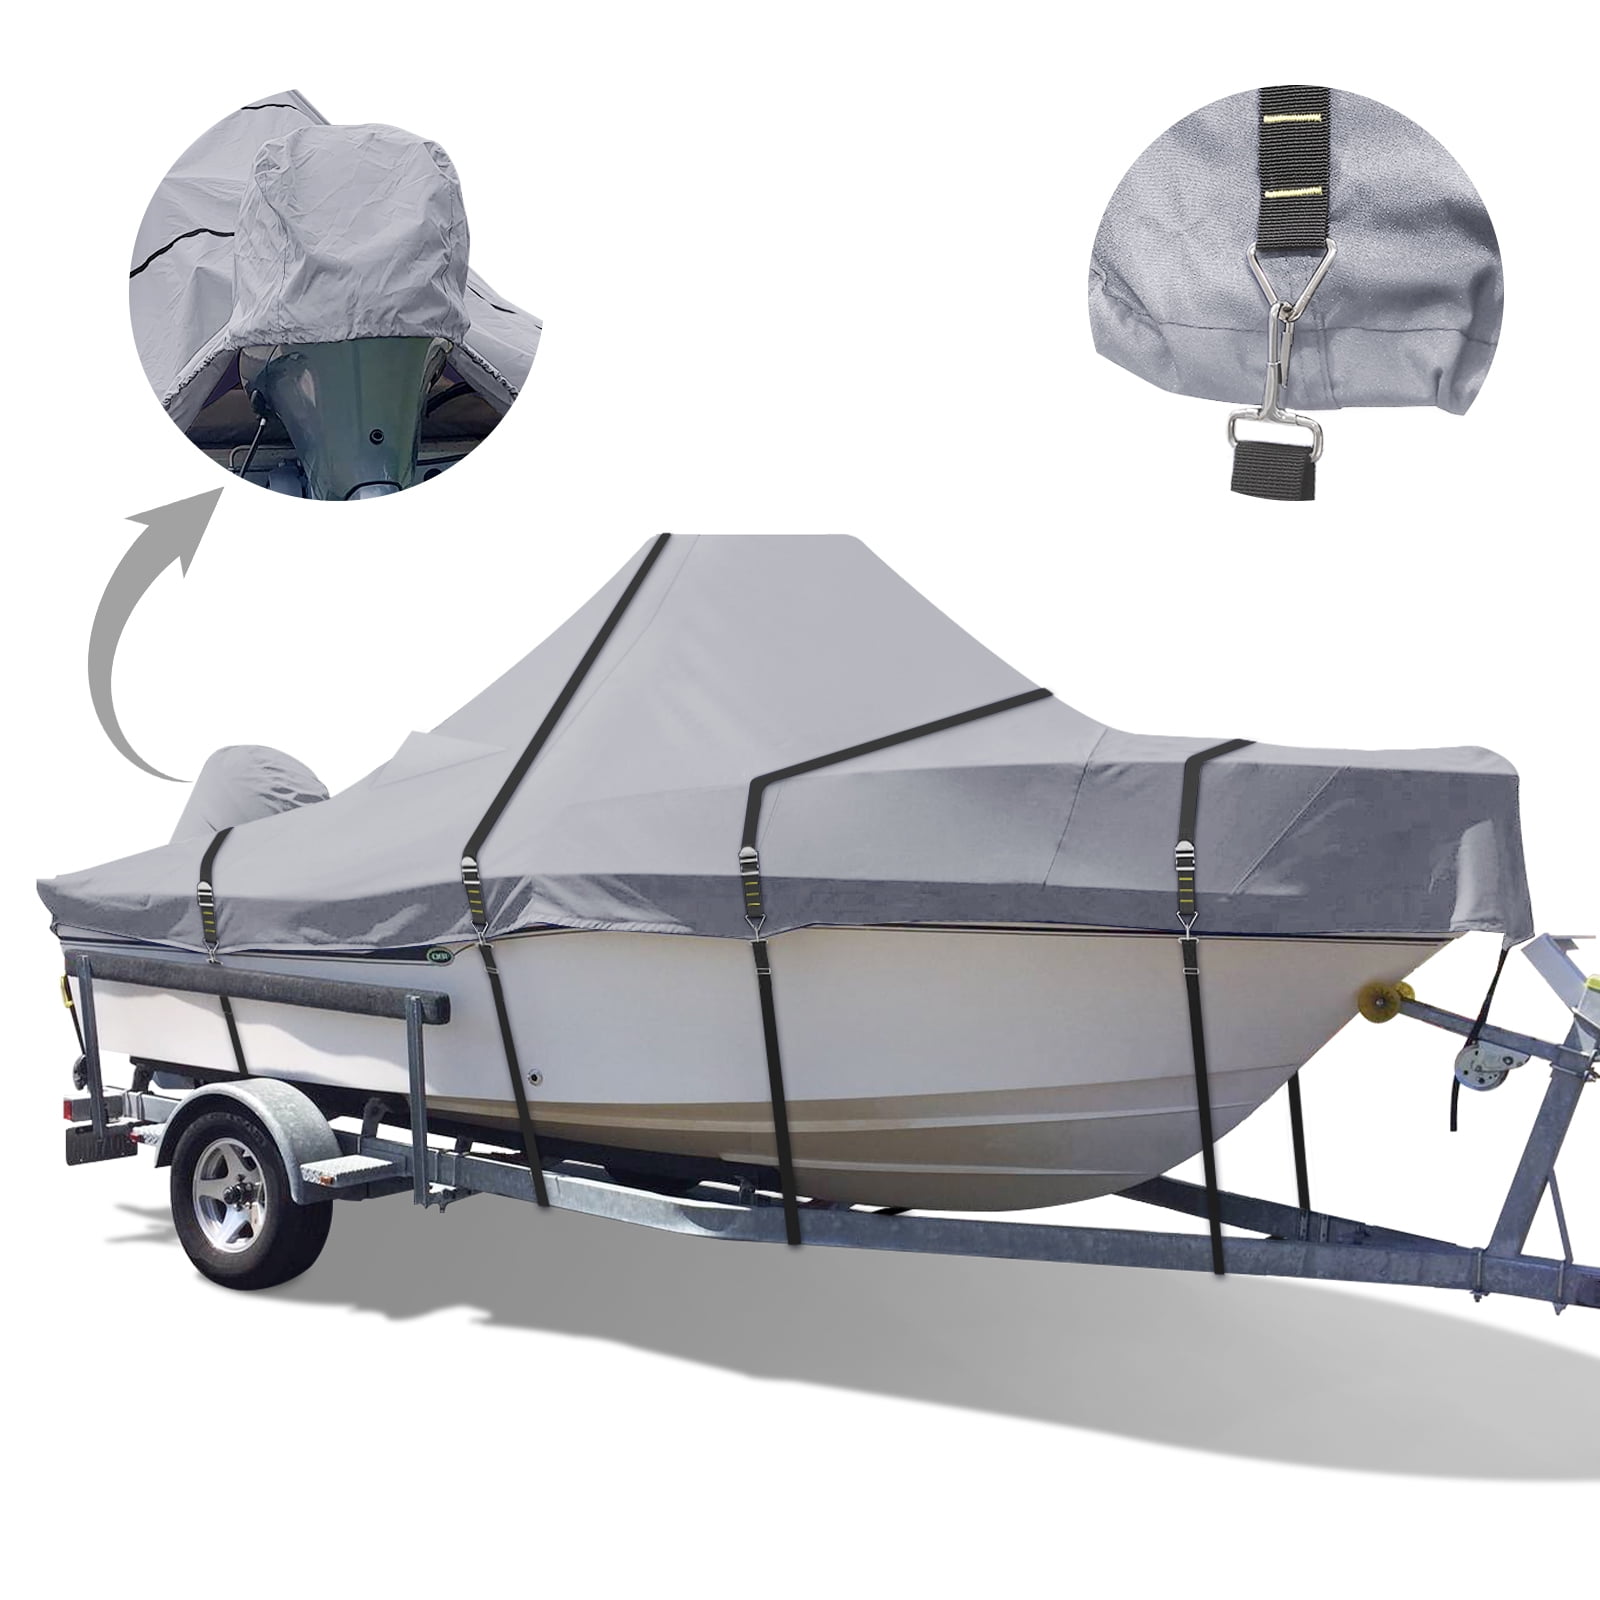  Leader Accessories Molded Pond Boat Cover Fits 8'-10'L Pond or  Bass Boats (300D Grey) : Sports & Outdoors